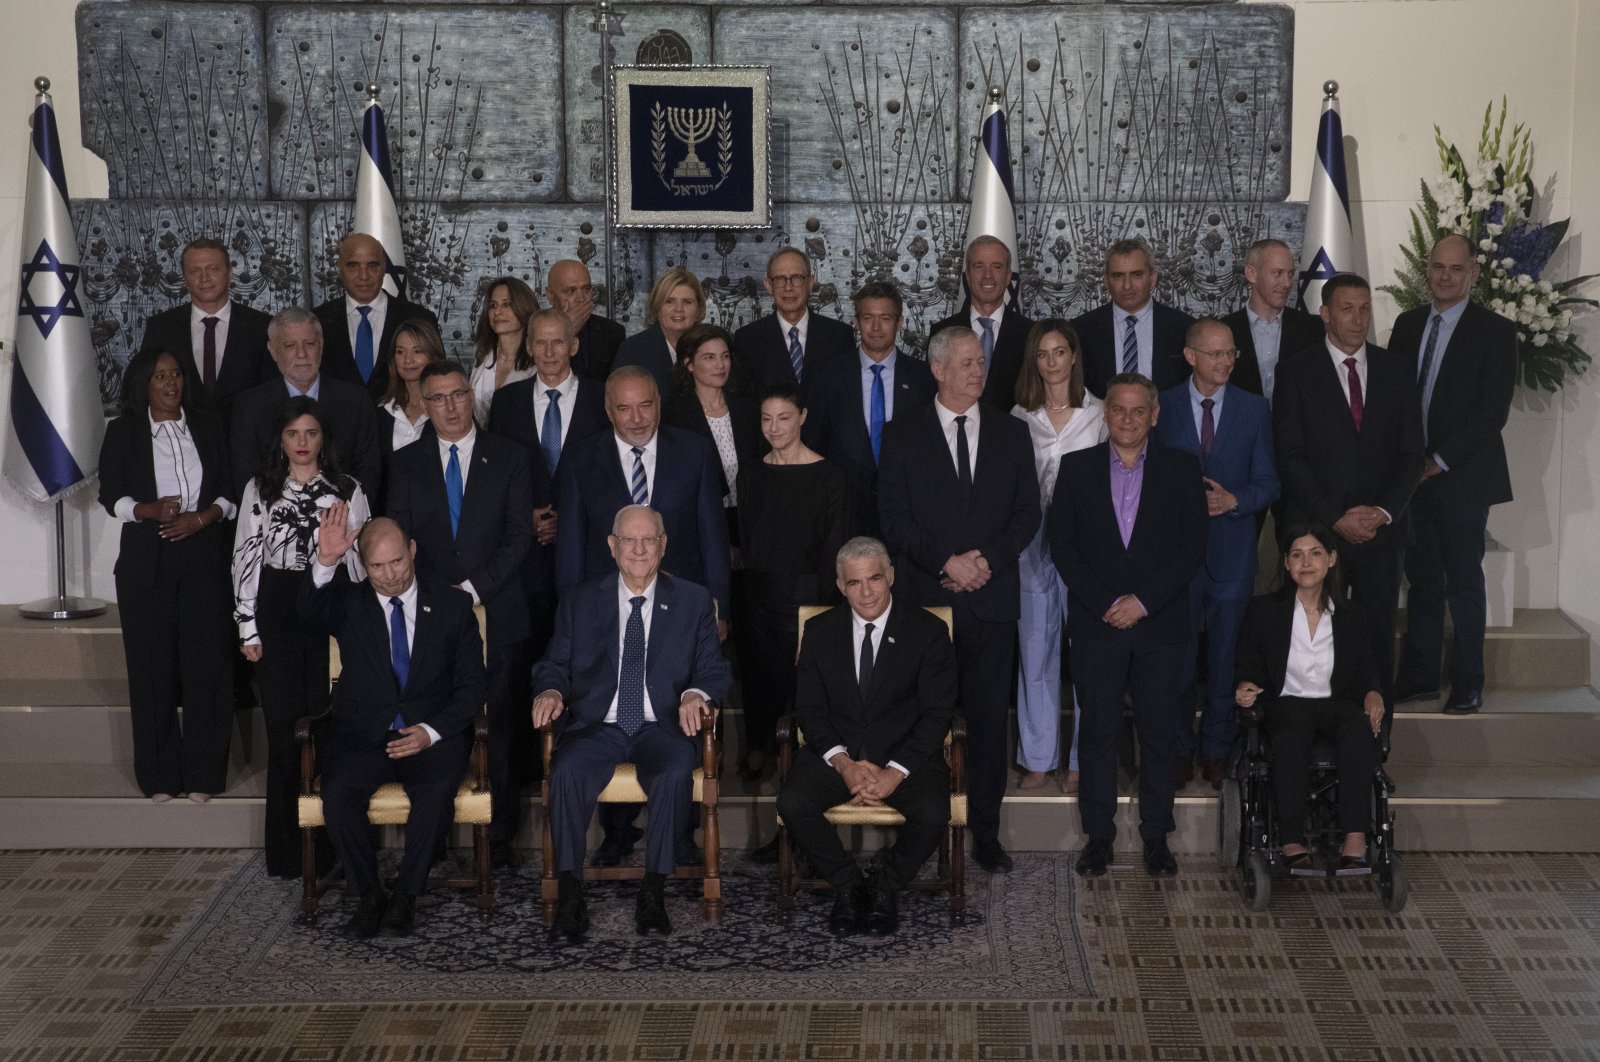 Israeli Prime Minister Naftali Bennett, seated left, President Reuven Rivlin, seated center, and Alternate Prime Minister and Minister of Foreign Affairs Yair Lapid seated right, pose for a group photo with the ministers of the new government at the president's residence in Jerusalem, June 14, 2021. (AP Photo)